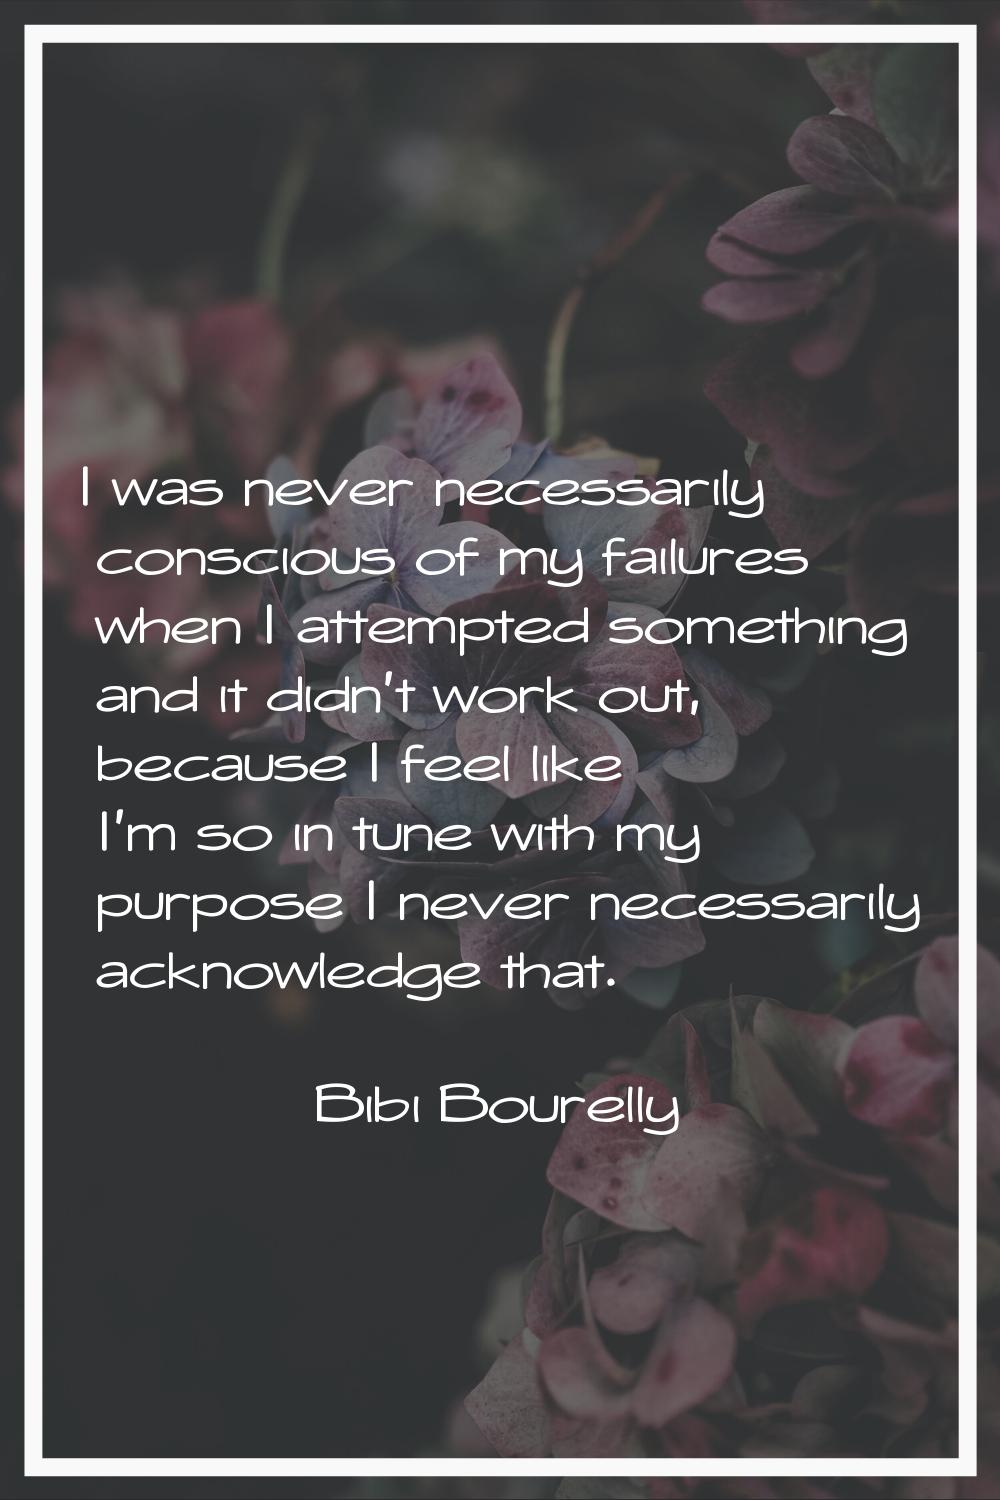 I was never necessarily conscious of my failures when I attempted something and it didn't work out,